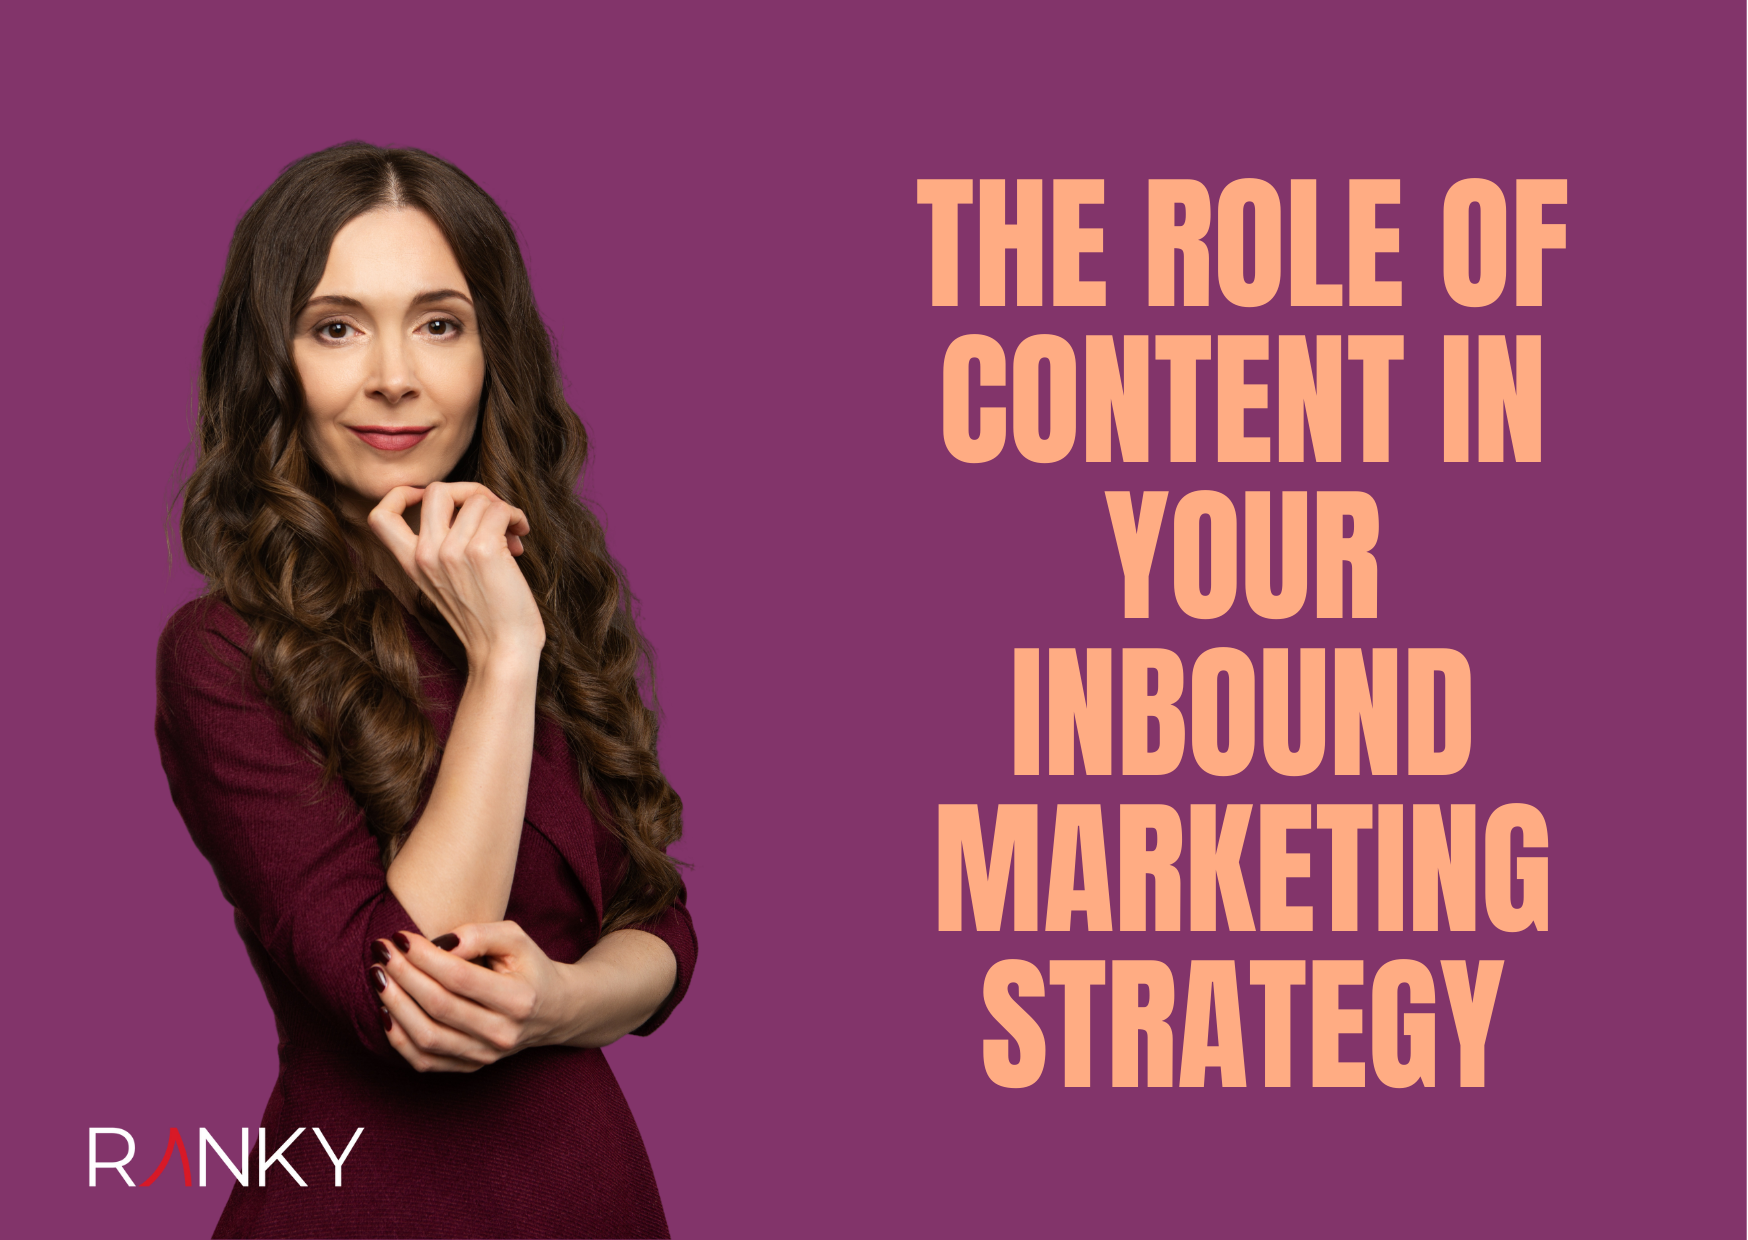 What Role Does Content Play in Your Inbound Marketing Strategy?